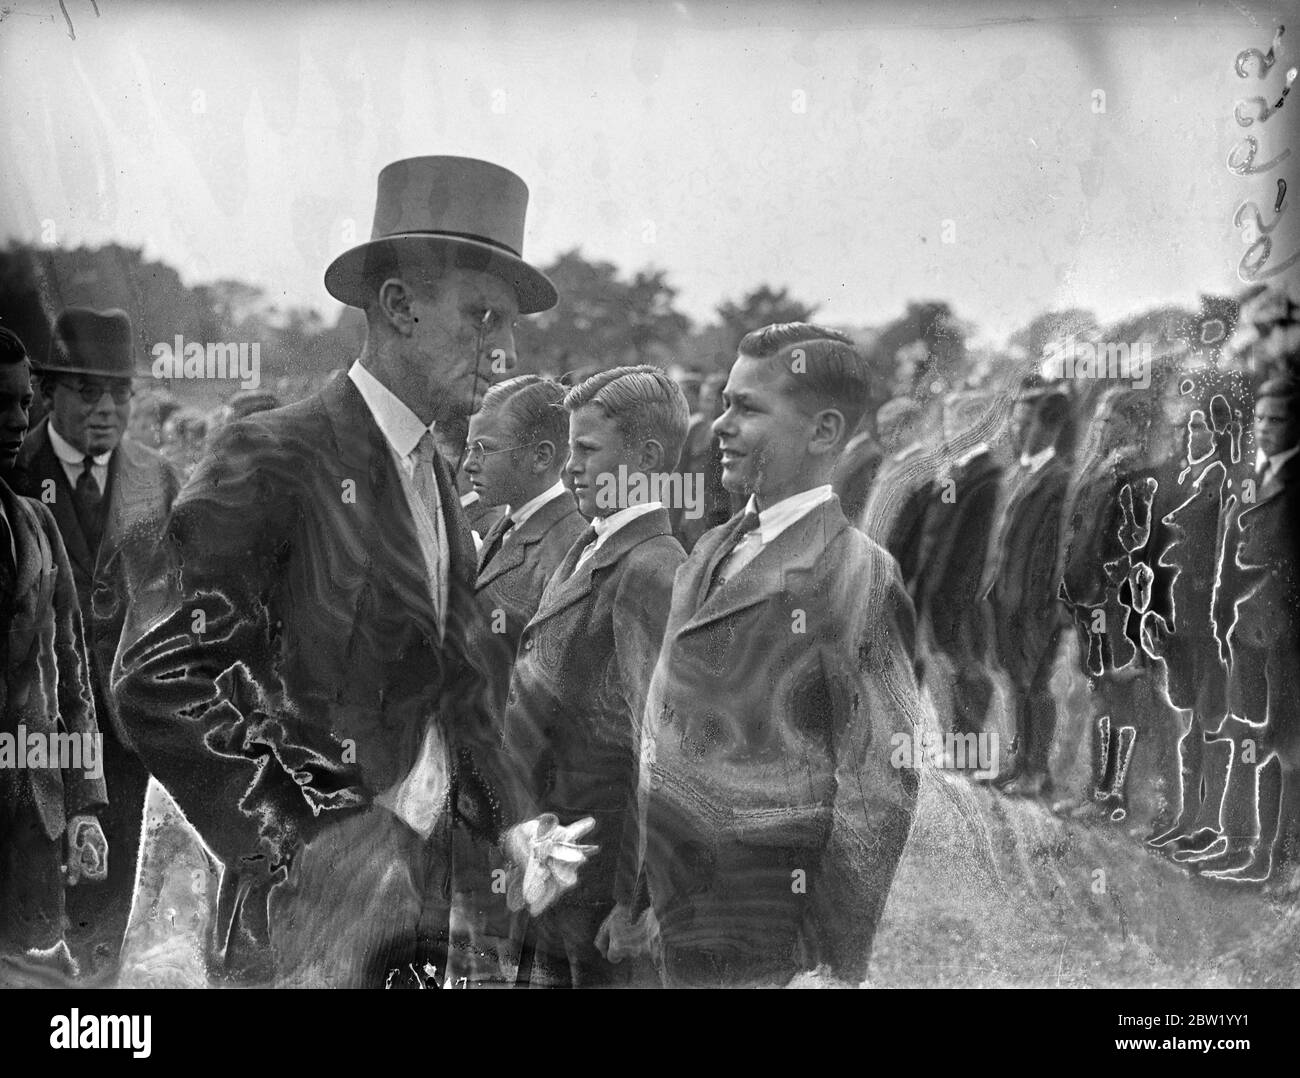 Admiral the Earl of Cork and Orrery inspected boys at the Bisley School, near Woking, at their Empire Parade. The boys carried standards of the dominions and colonies. 18 June 1937 Stock Photo